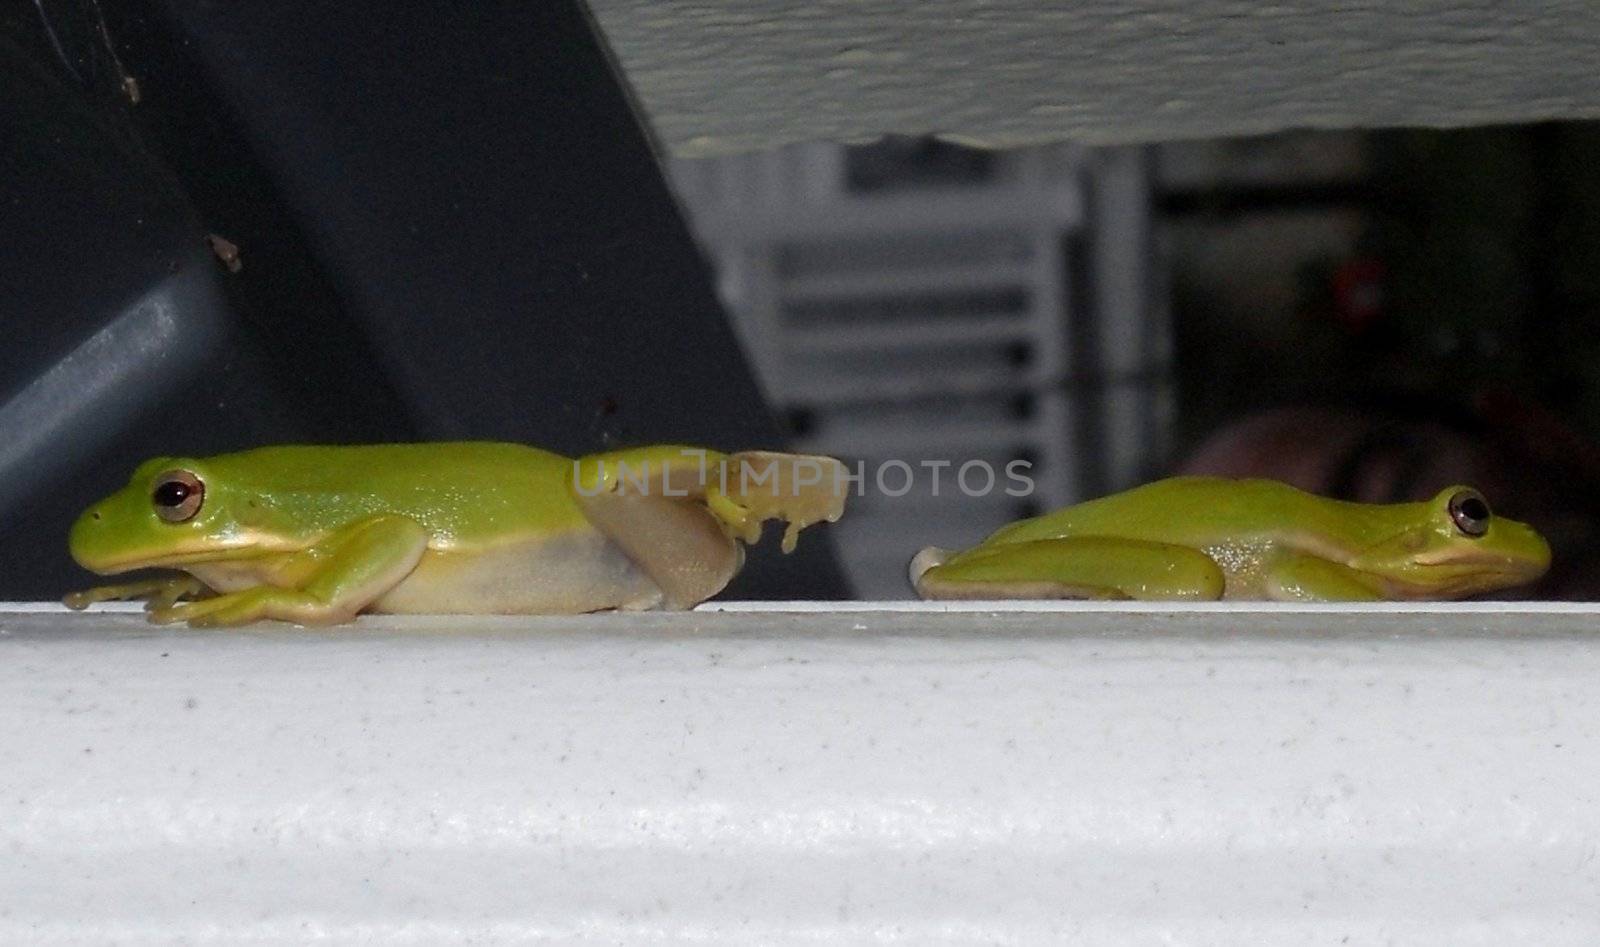 American Green Tree Frogs by xplorer1959@hotmail.com